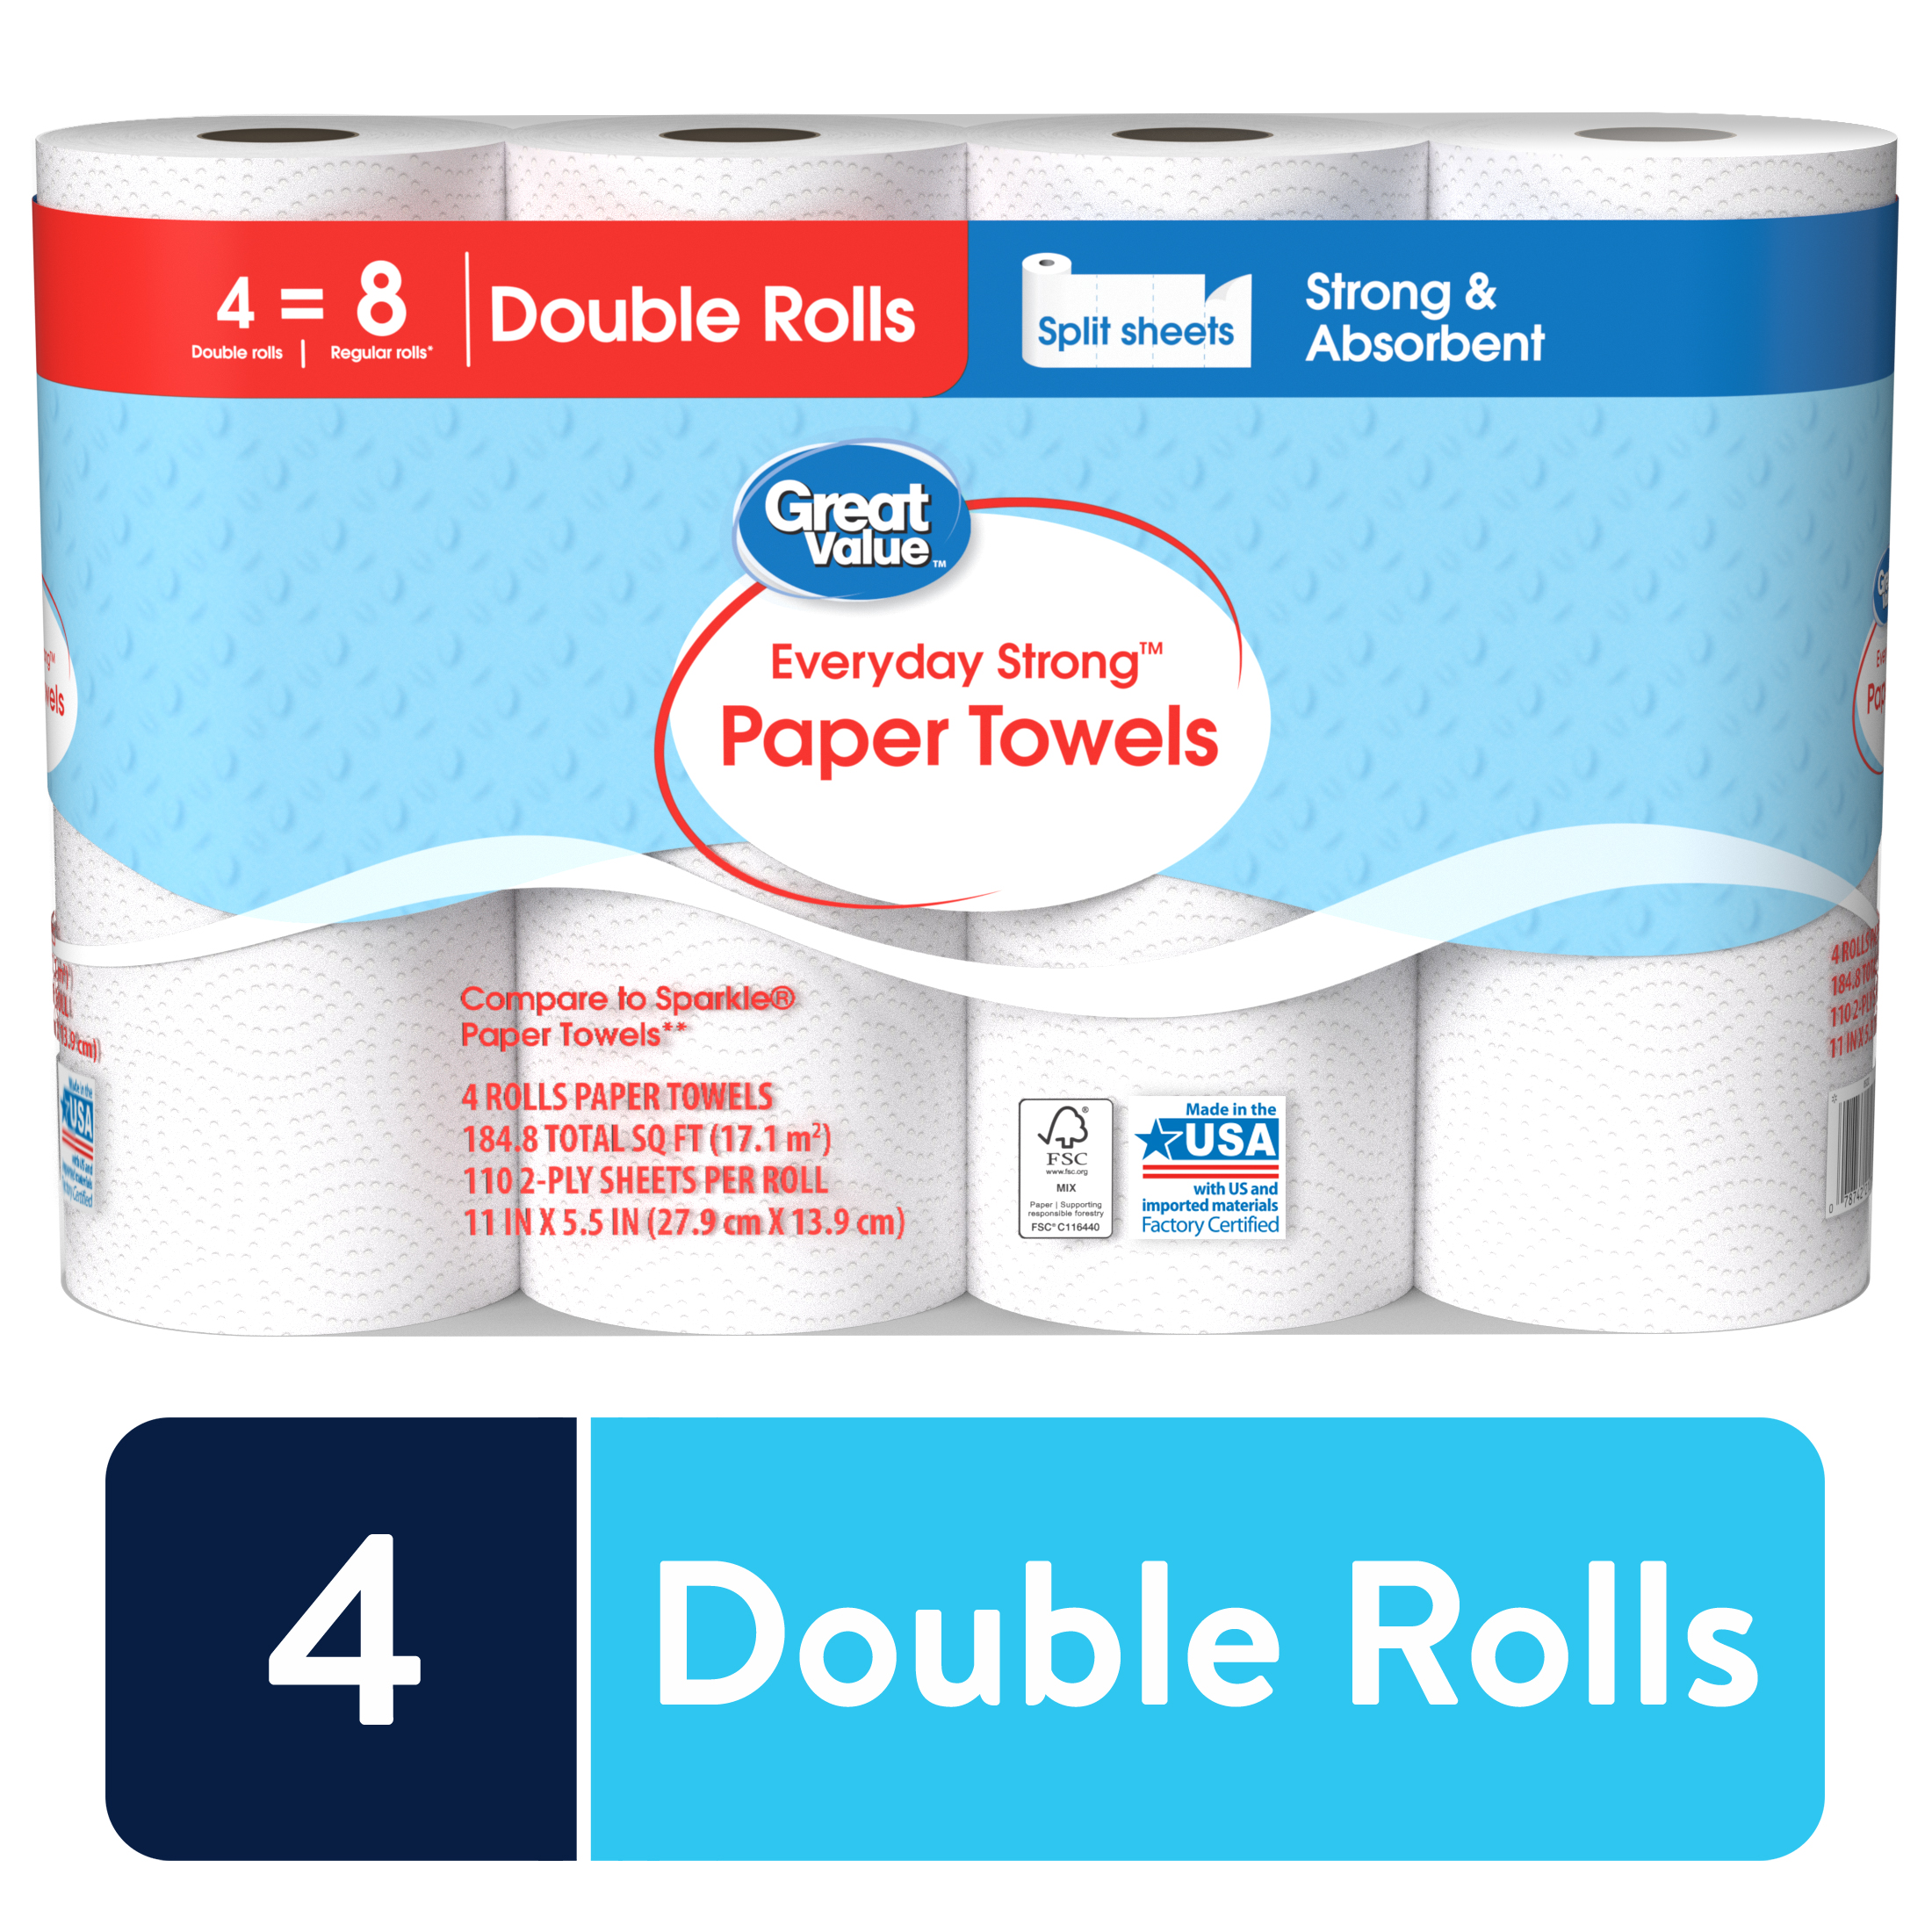 Great Value Everyday Strong Paper Towels, Split Sheets, 4 Double Rolls ...